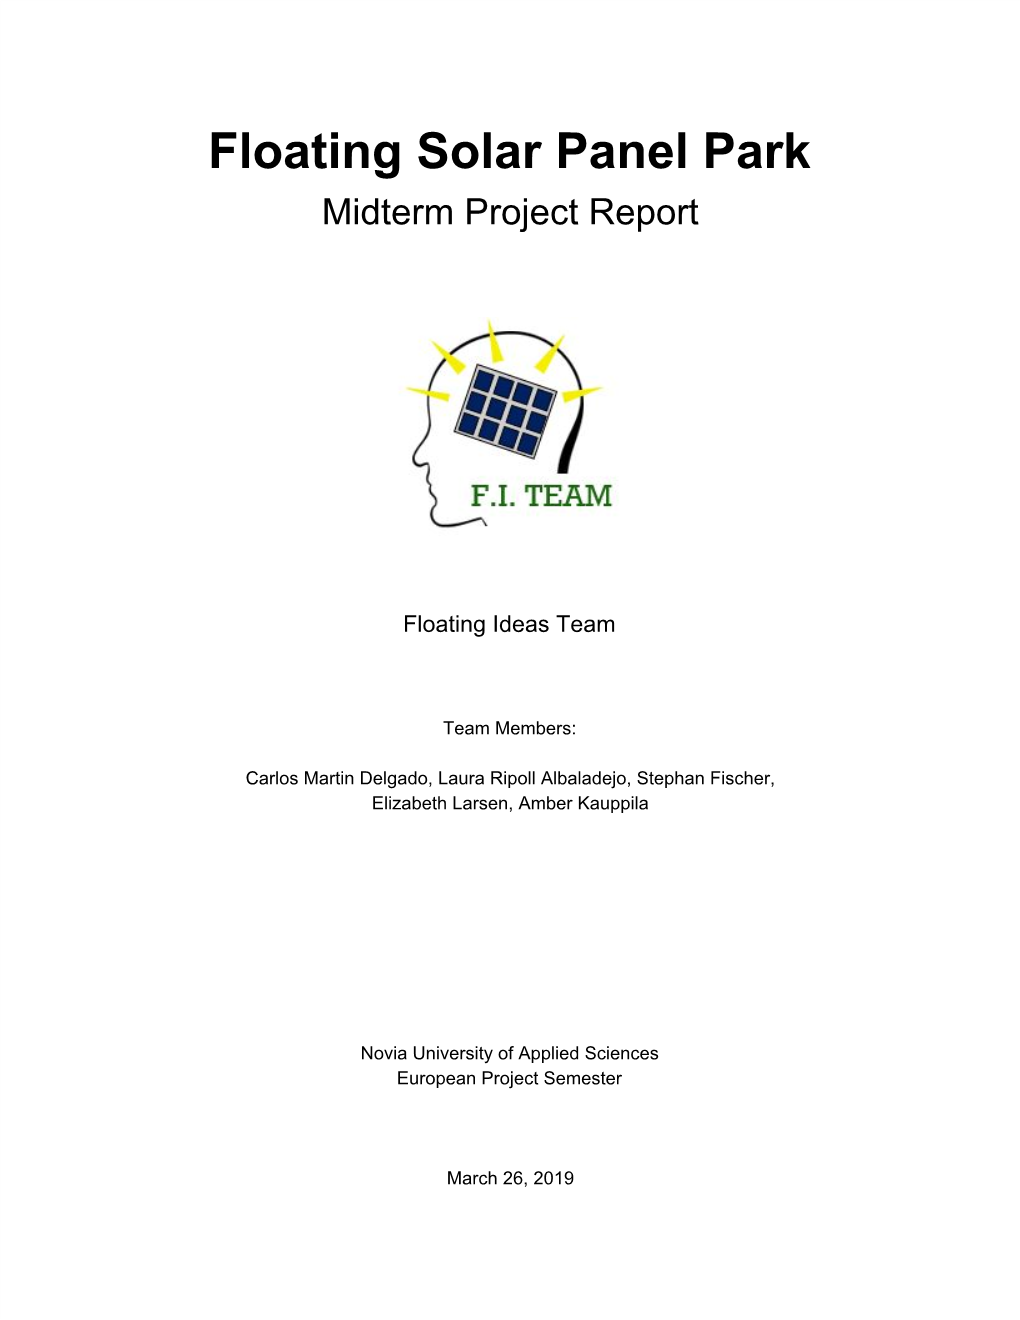 Floating Solar Panel Park Midterm Project Report